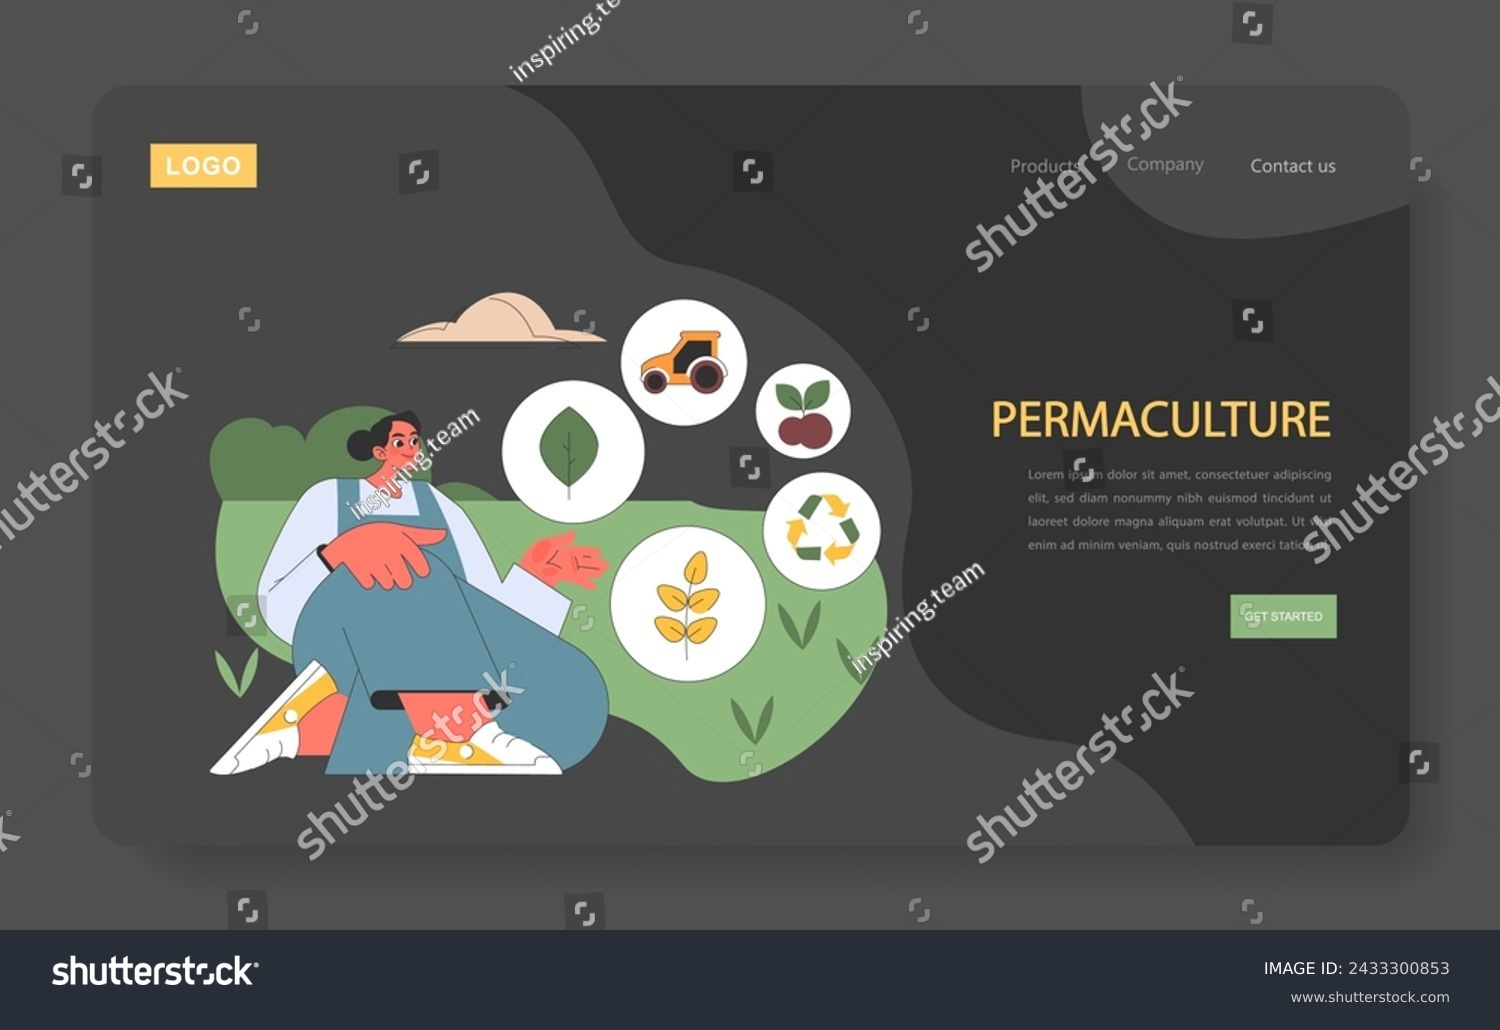 SVG of Permaculture concept. Individual demonstrates circular system of sustainable agriculture with icons for recycling, plants, and equipment. svg